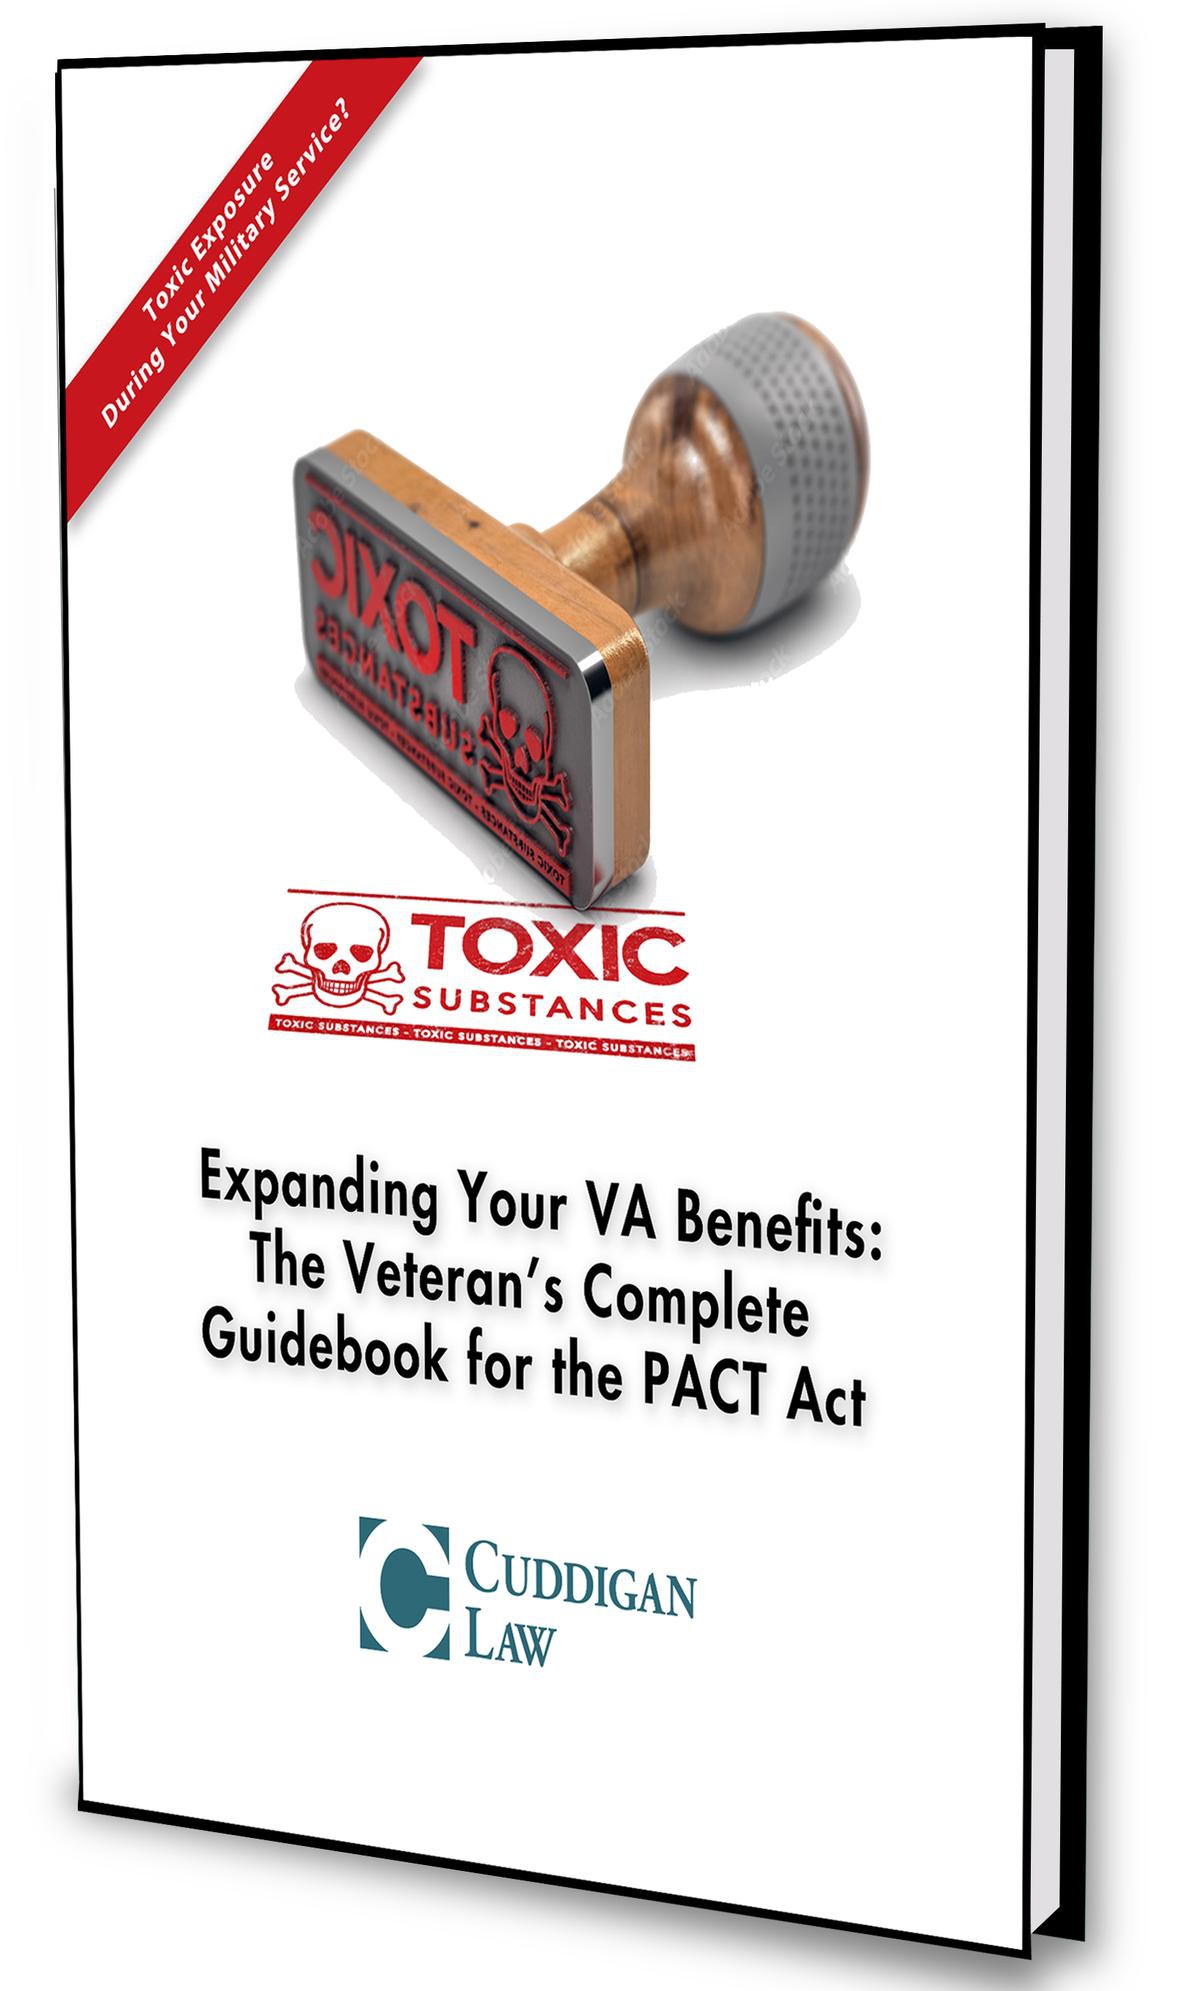 Expanding Your VA Benefits: The Veteran’s Complete Guidebook for the PACT Act